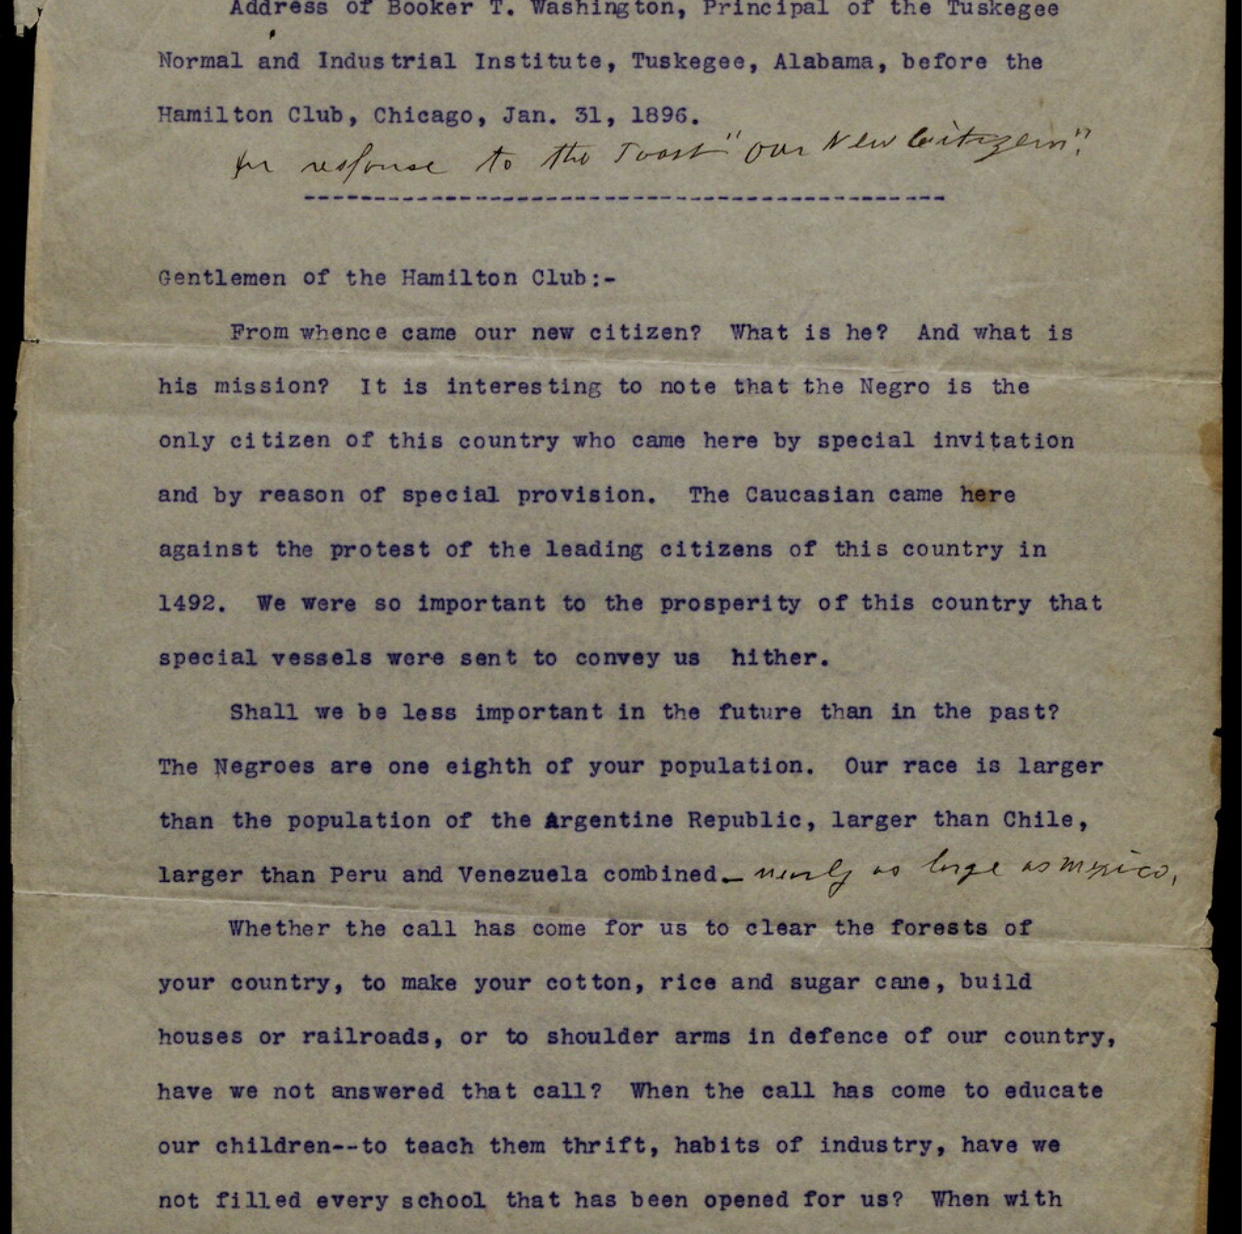 Address of Booker T. Washington, principal of the Tuskegee Normal and Industrial Institute, Tuskegee, Alabama, before the Hamilton Club, Chicago, 1896 (The Gilder Lehrman Institute, GLC07934)